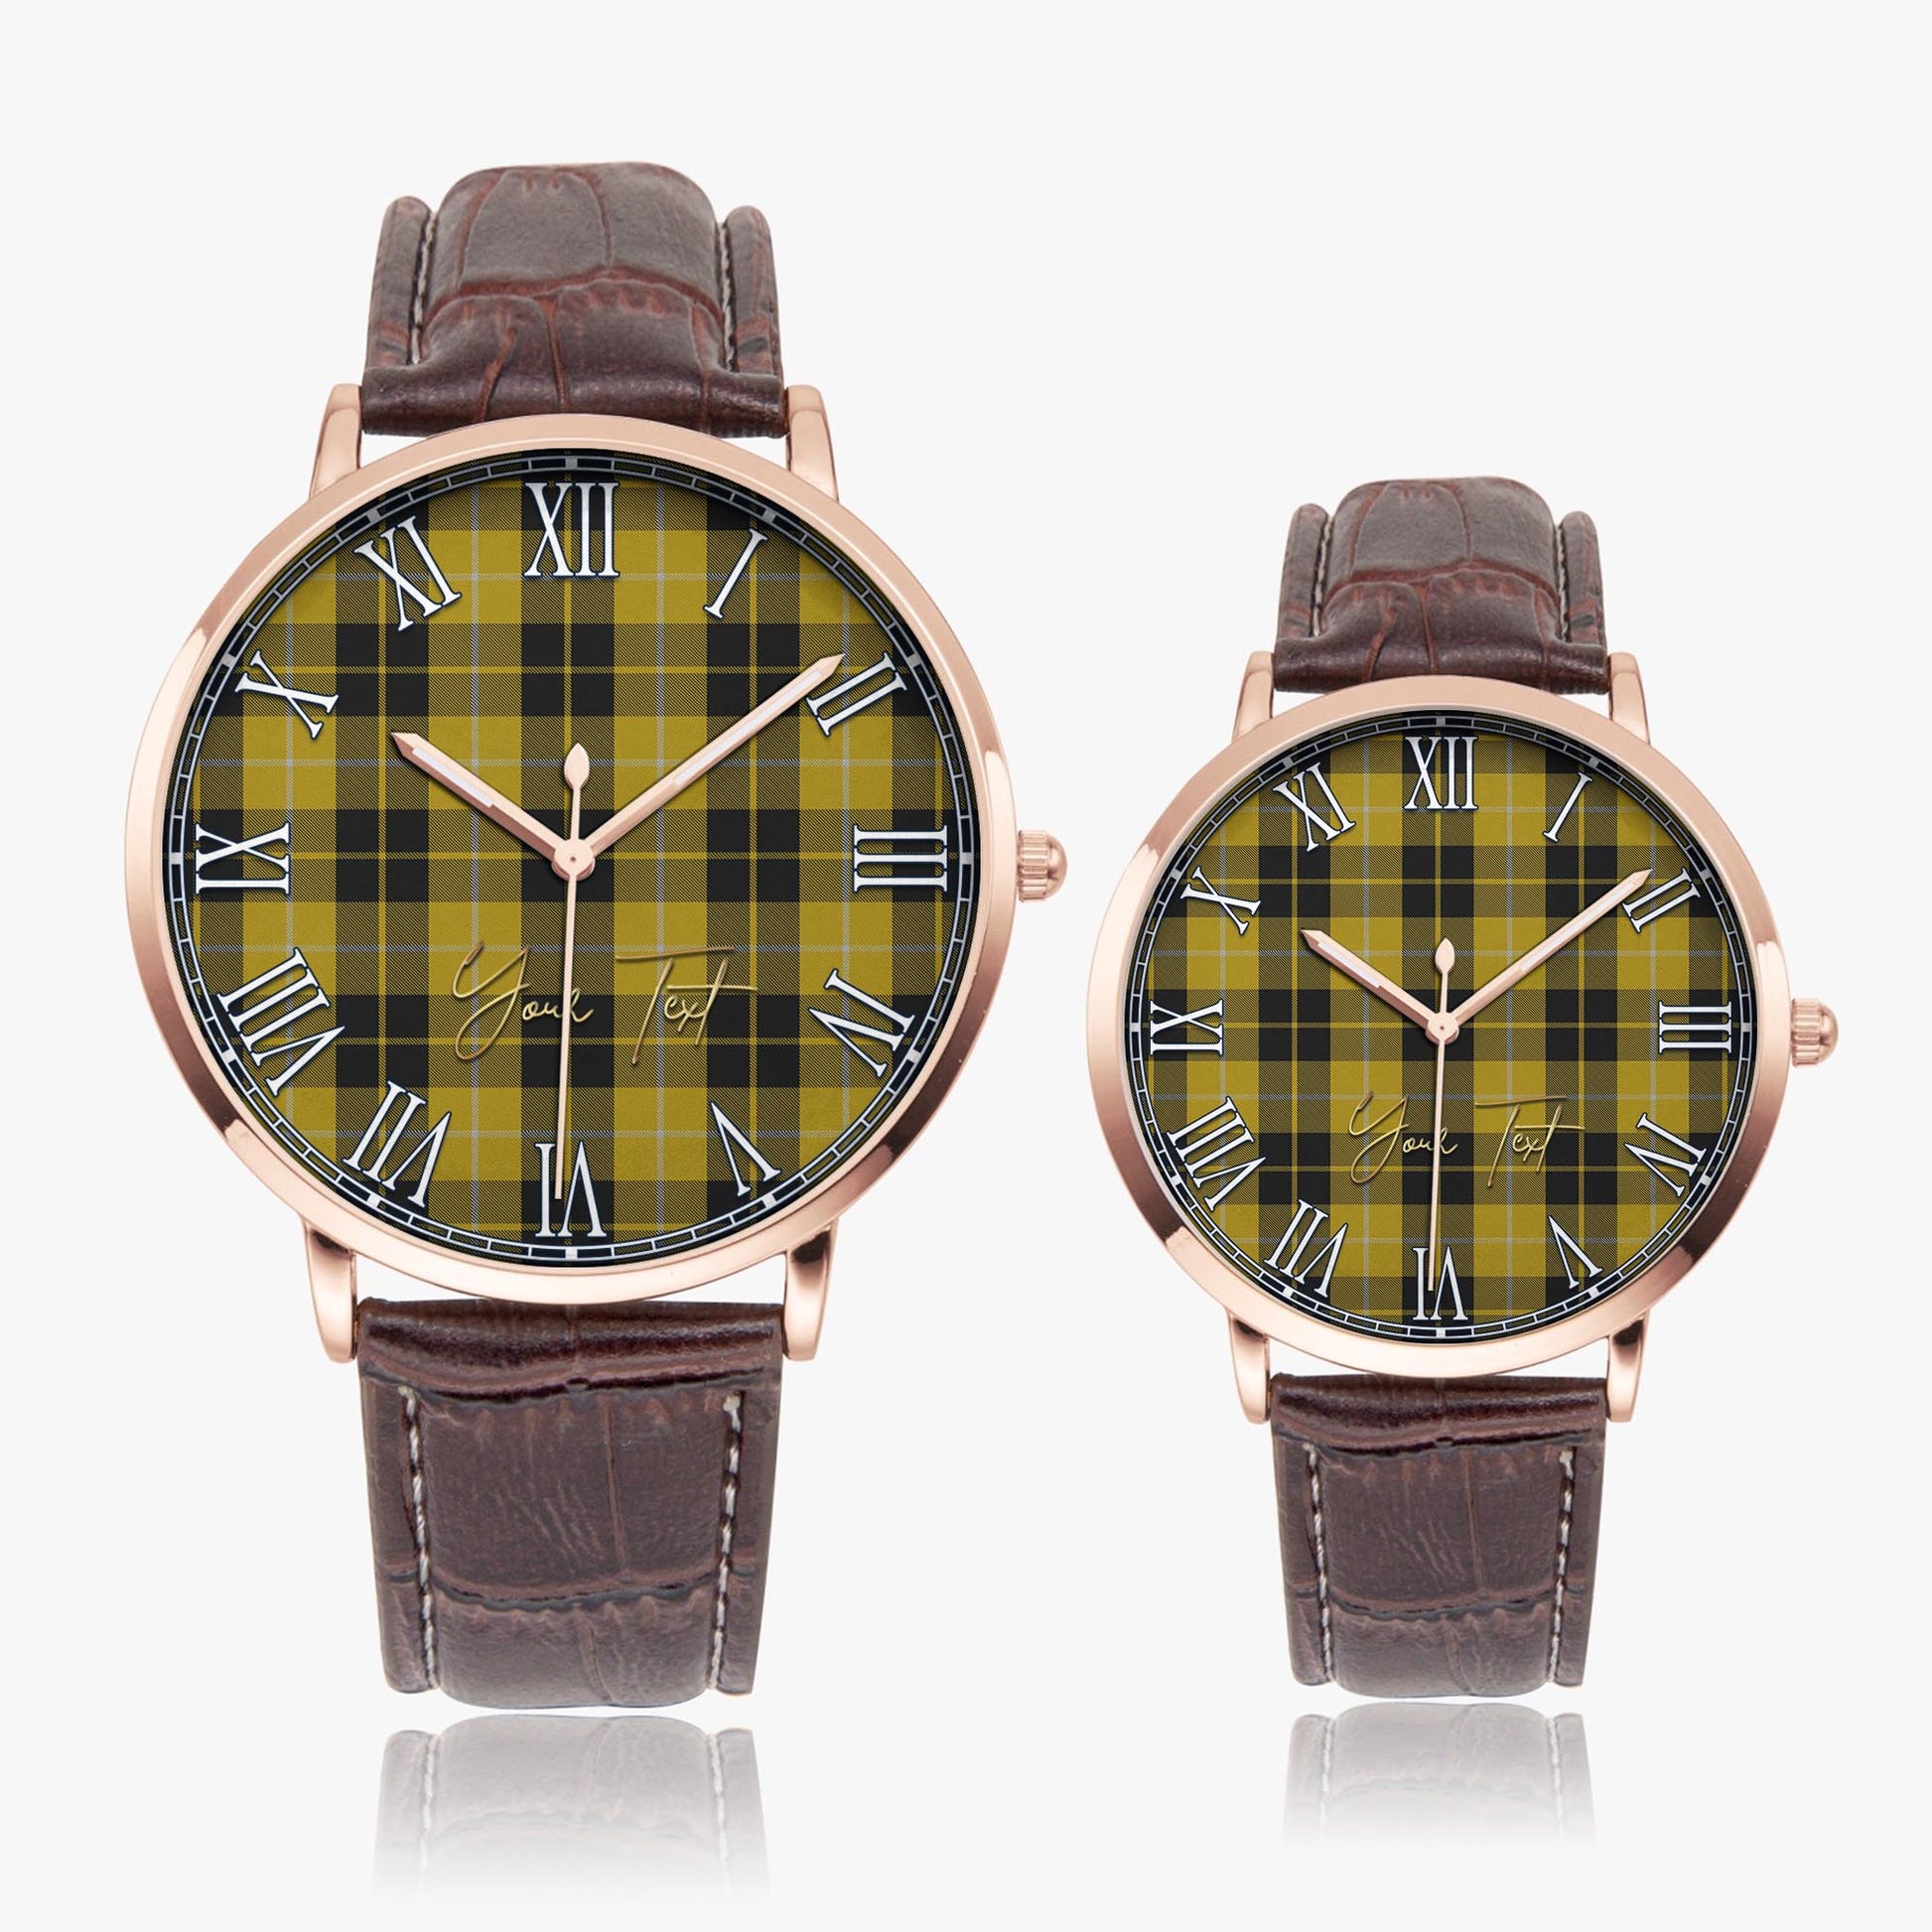 Barclay Dress Tartan Personalized Your Text Leather Trap Quartz Watch Ultra Thin Rose Gold Case With Brown Leather Strap - Tartanvibesclothing